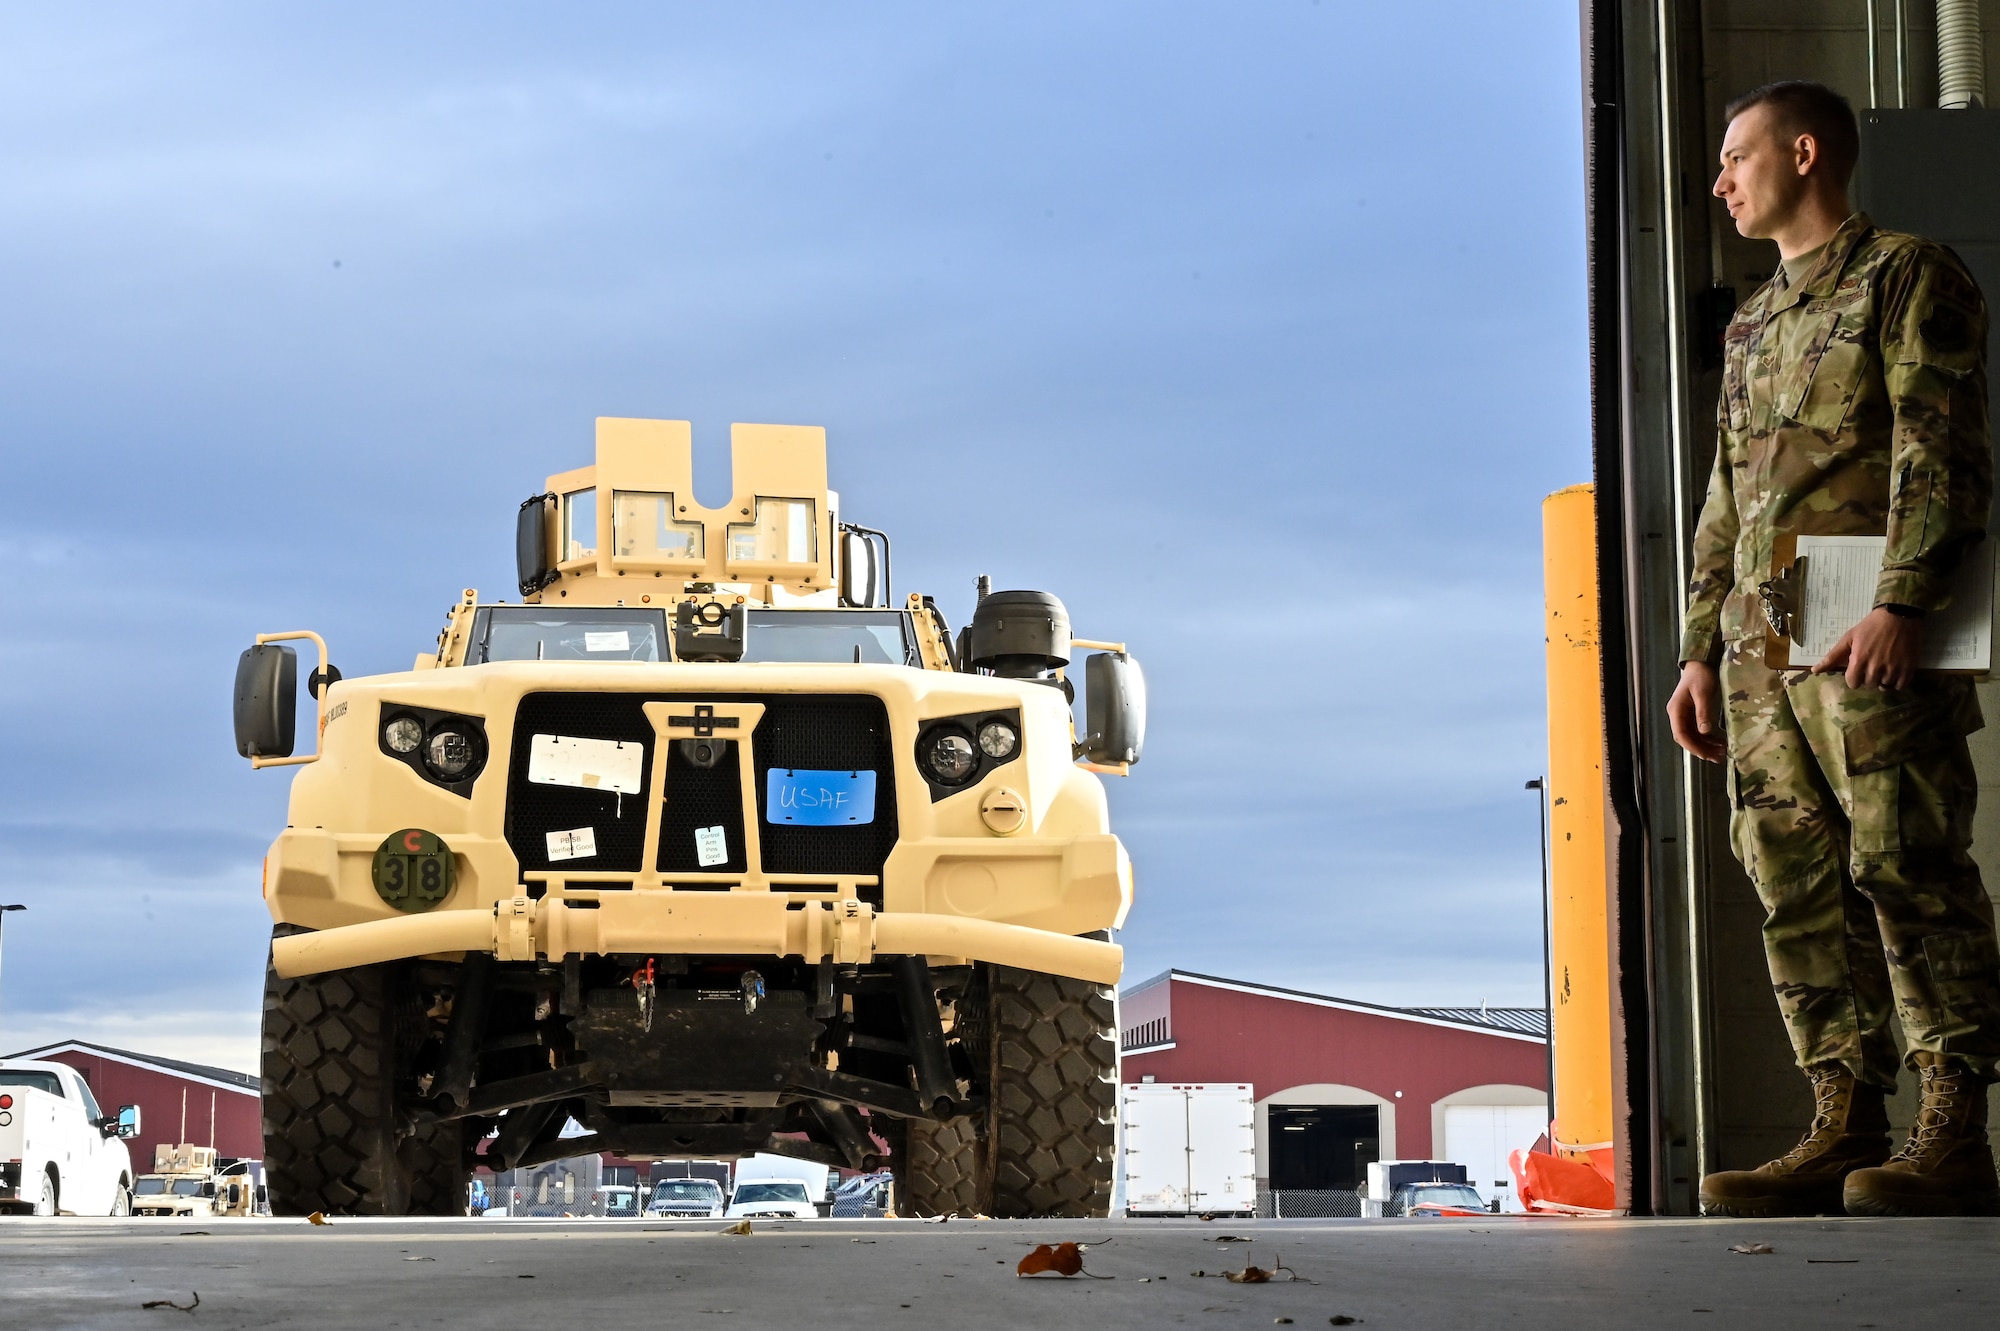 Senior Airman Korey Sarantopoulos, 90th Logistics Readiness Squadron vehicle maintenance journeyman, waits for Mark Bramman, 90 LRS vehicle maintenance craftsman, to drive a Joint Light Tactical Vehicle into the maintenance bay before performing a limited technical inspection on F.E. Warren Air Force Base, Wyoming, Oct 25, 2022. The 90 LRS is tasked with preparing the next generation of security forces vehicles sent to protect the 90th Missile Wing's ICBM missile system as part of Air Force Global Strike Command’s priority to modernize. (U.S. Air Force photo by Joseph Coslett)